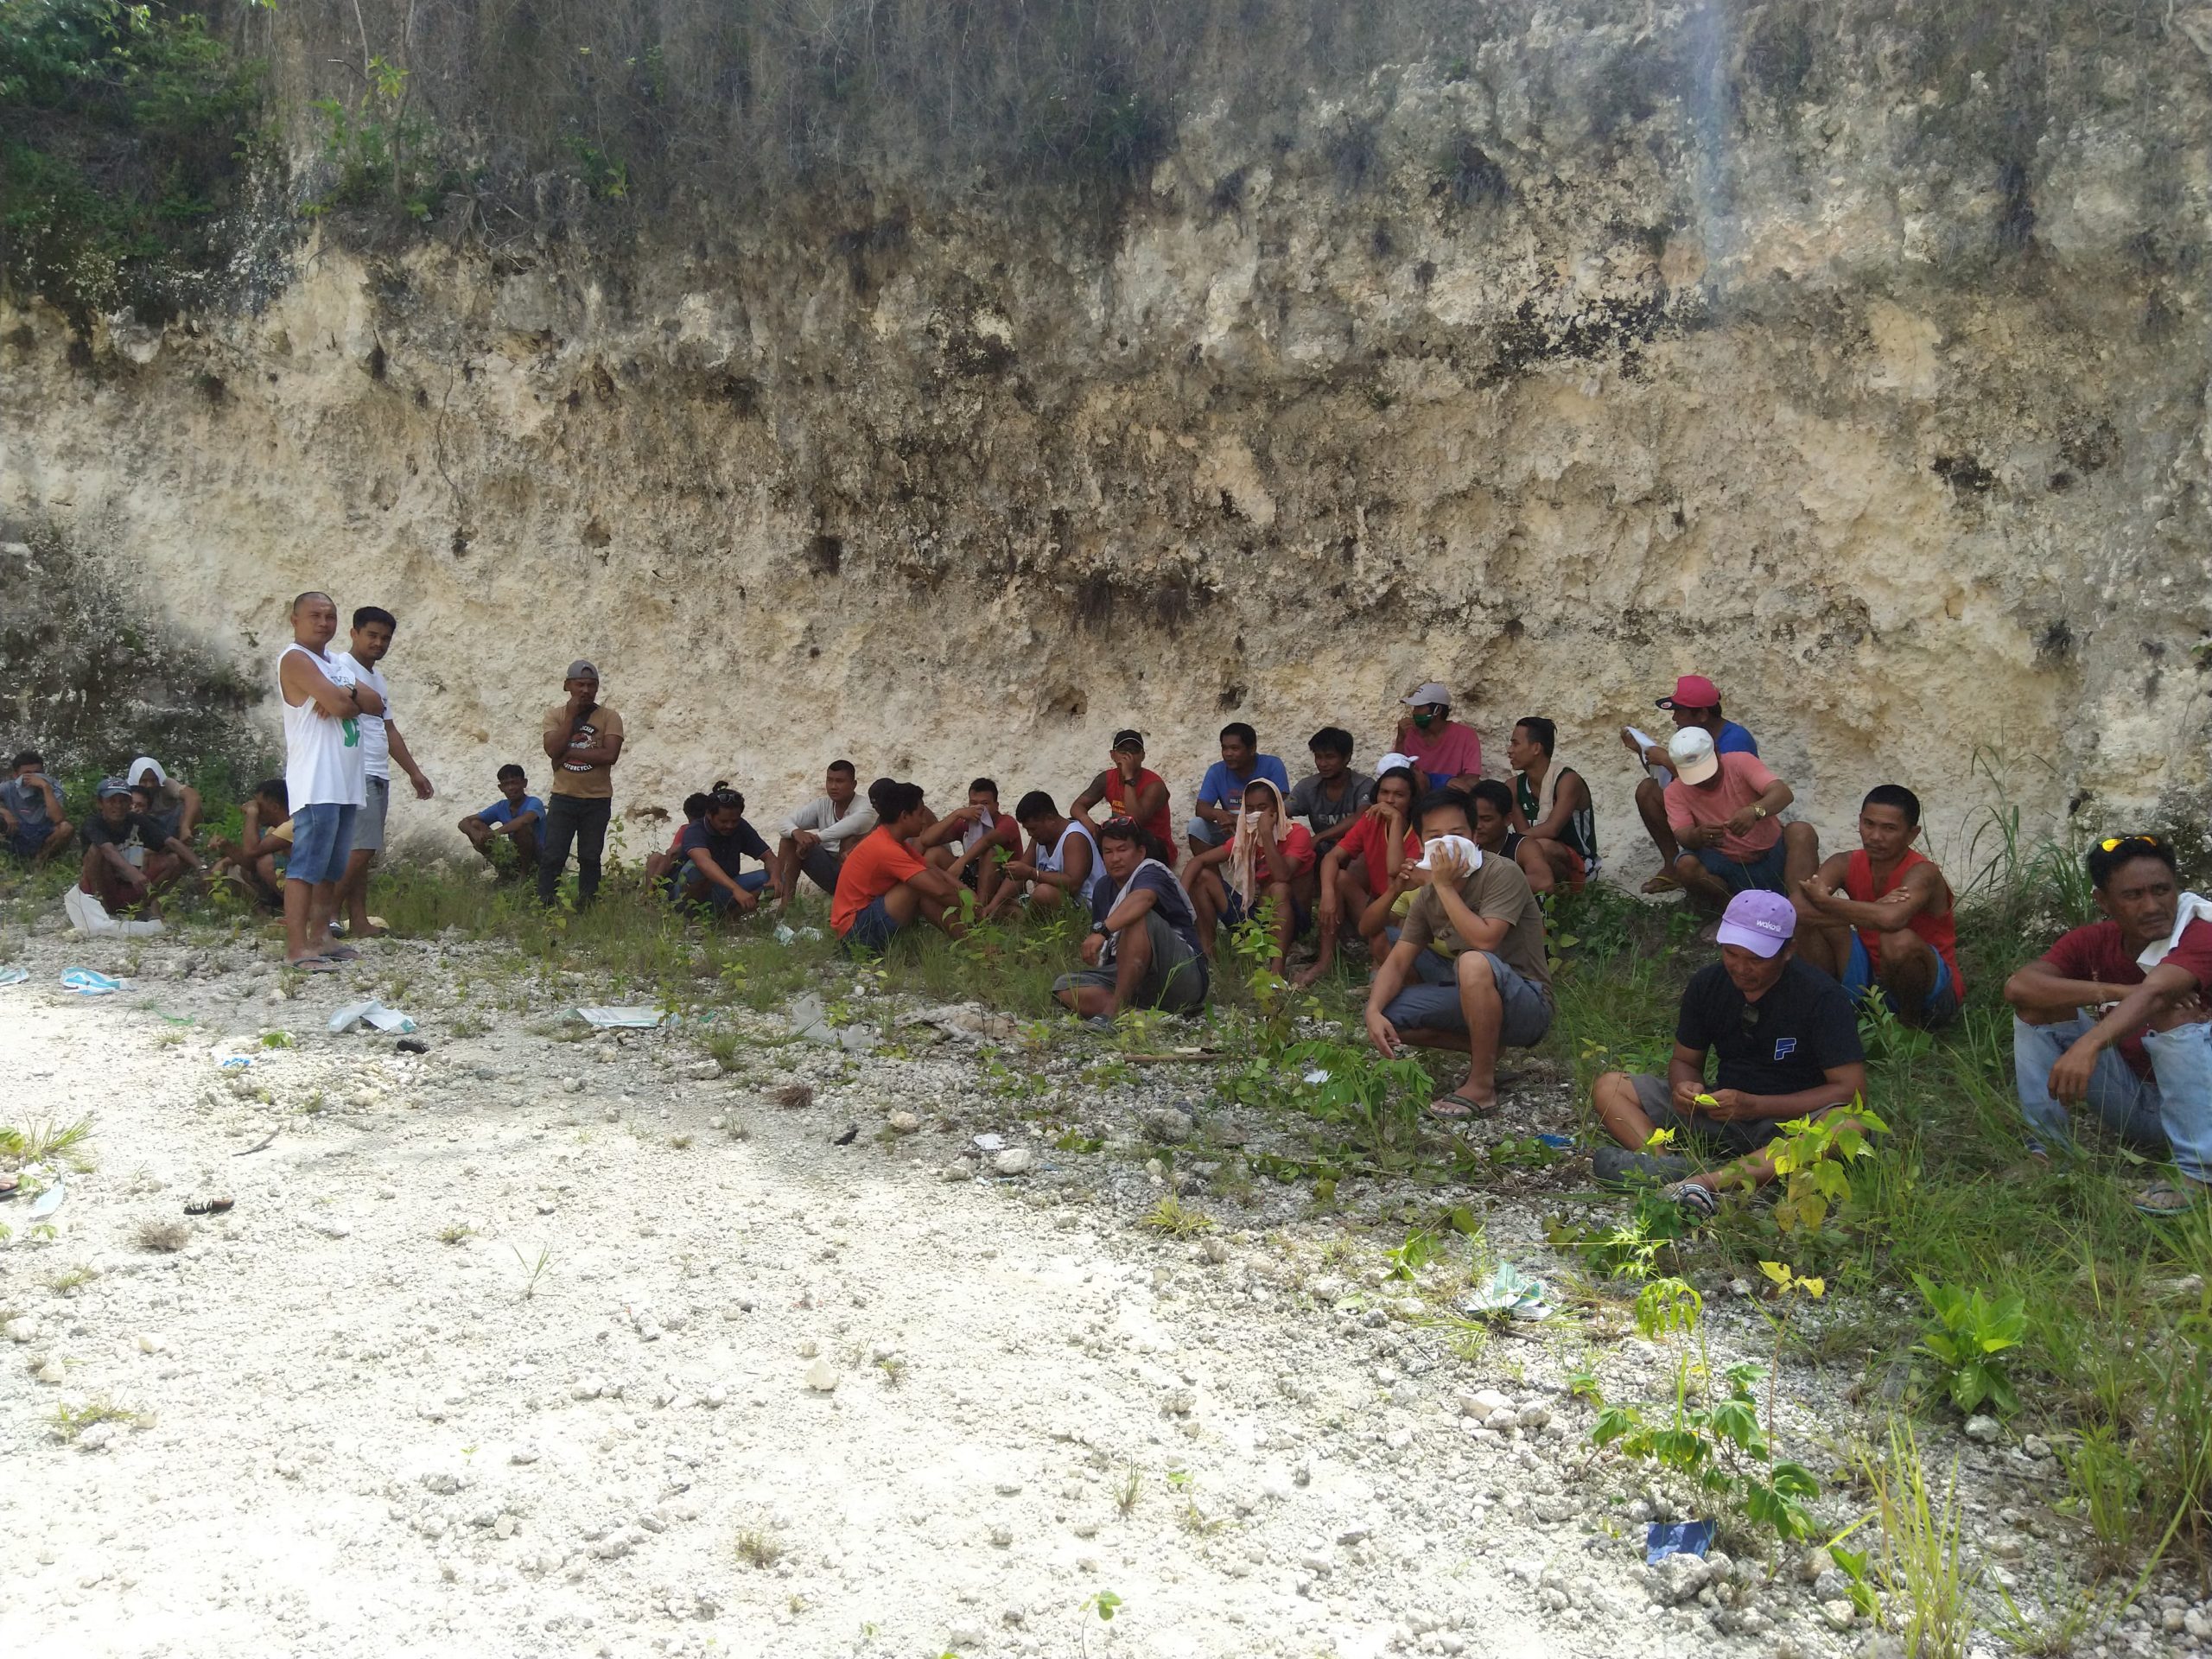 The First Provincial Mobile Force Company arrest 53 men caught engaging in illegal cockfighting activity or tigbakay on Saturday, June 29, 2020 in Sitio esi, Barangay Kal-anan, Tabogon, Cebu.| CONTRIBUTED PHOTO -- Police Lt. Col. Randy Korret